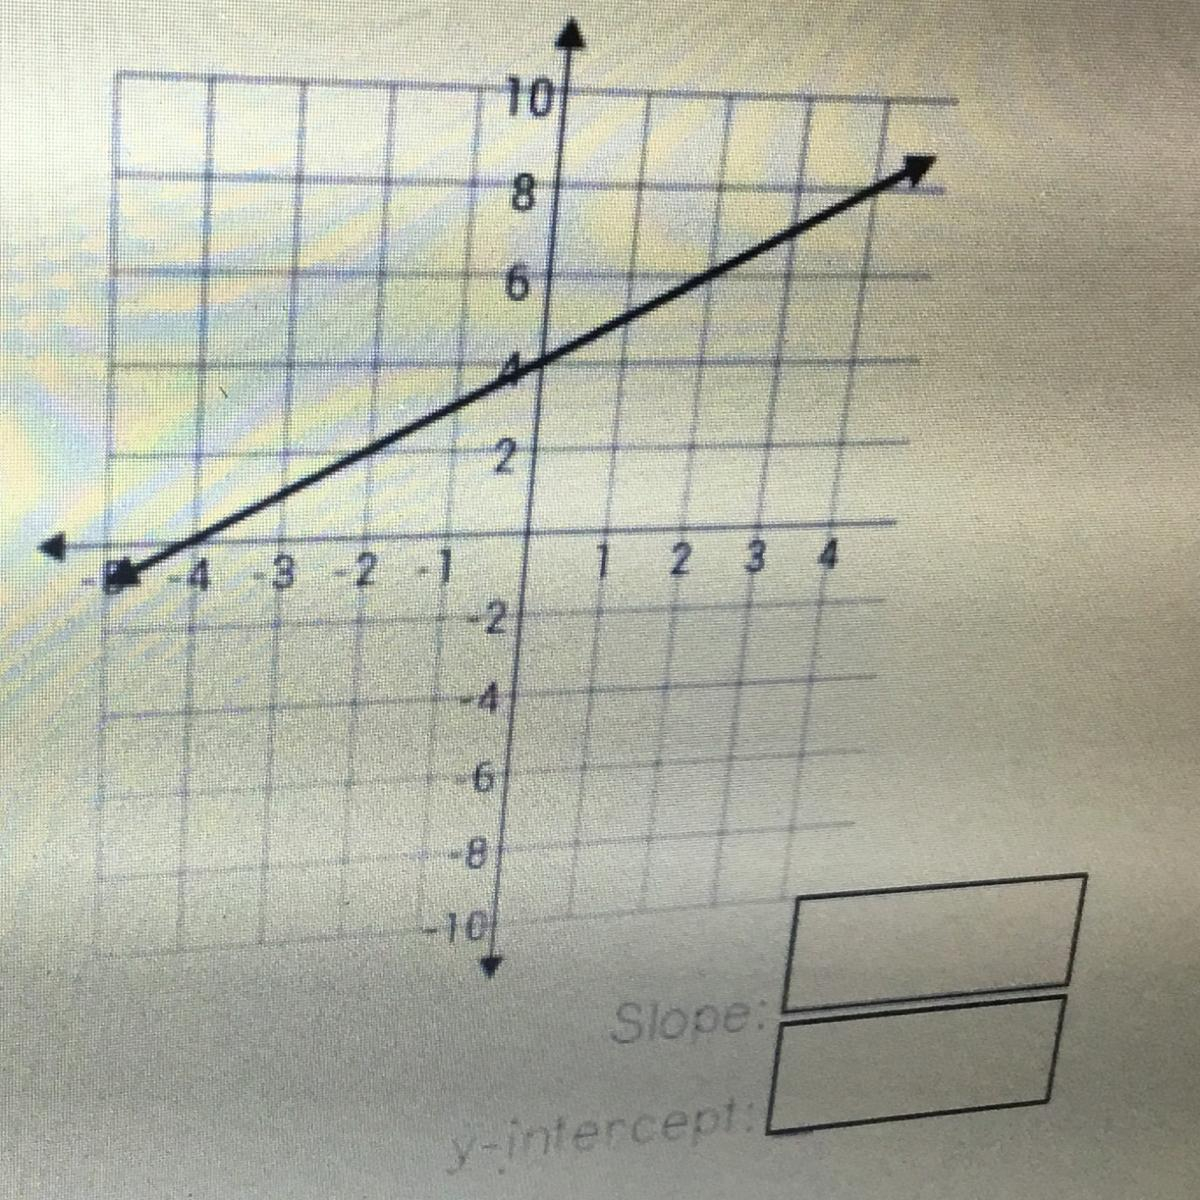 📈Slope: Y-Intercept: Equation: Is This Graph Proportional encequiconcerne And B Is The &amp;amp;quot;&amp;amp;quot;Y-Intercept&amp;amp;quot;&amp;amp;quot; Or The Place Where The Line Intercepts (Cro The 